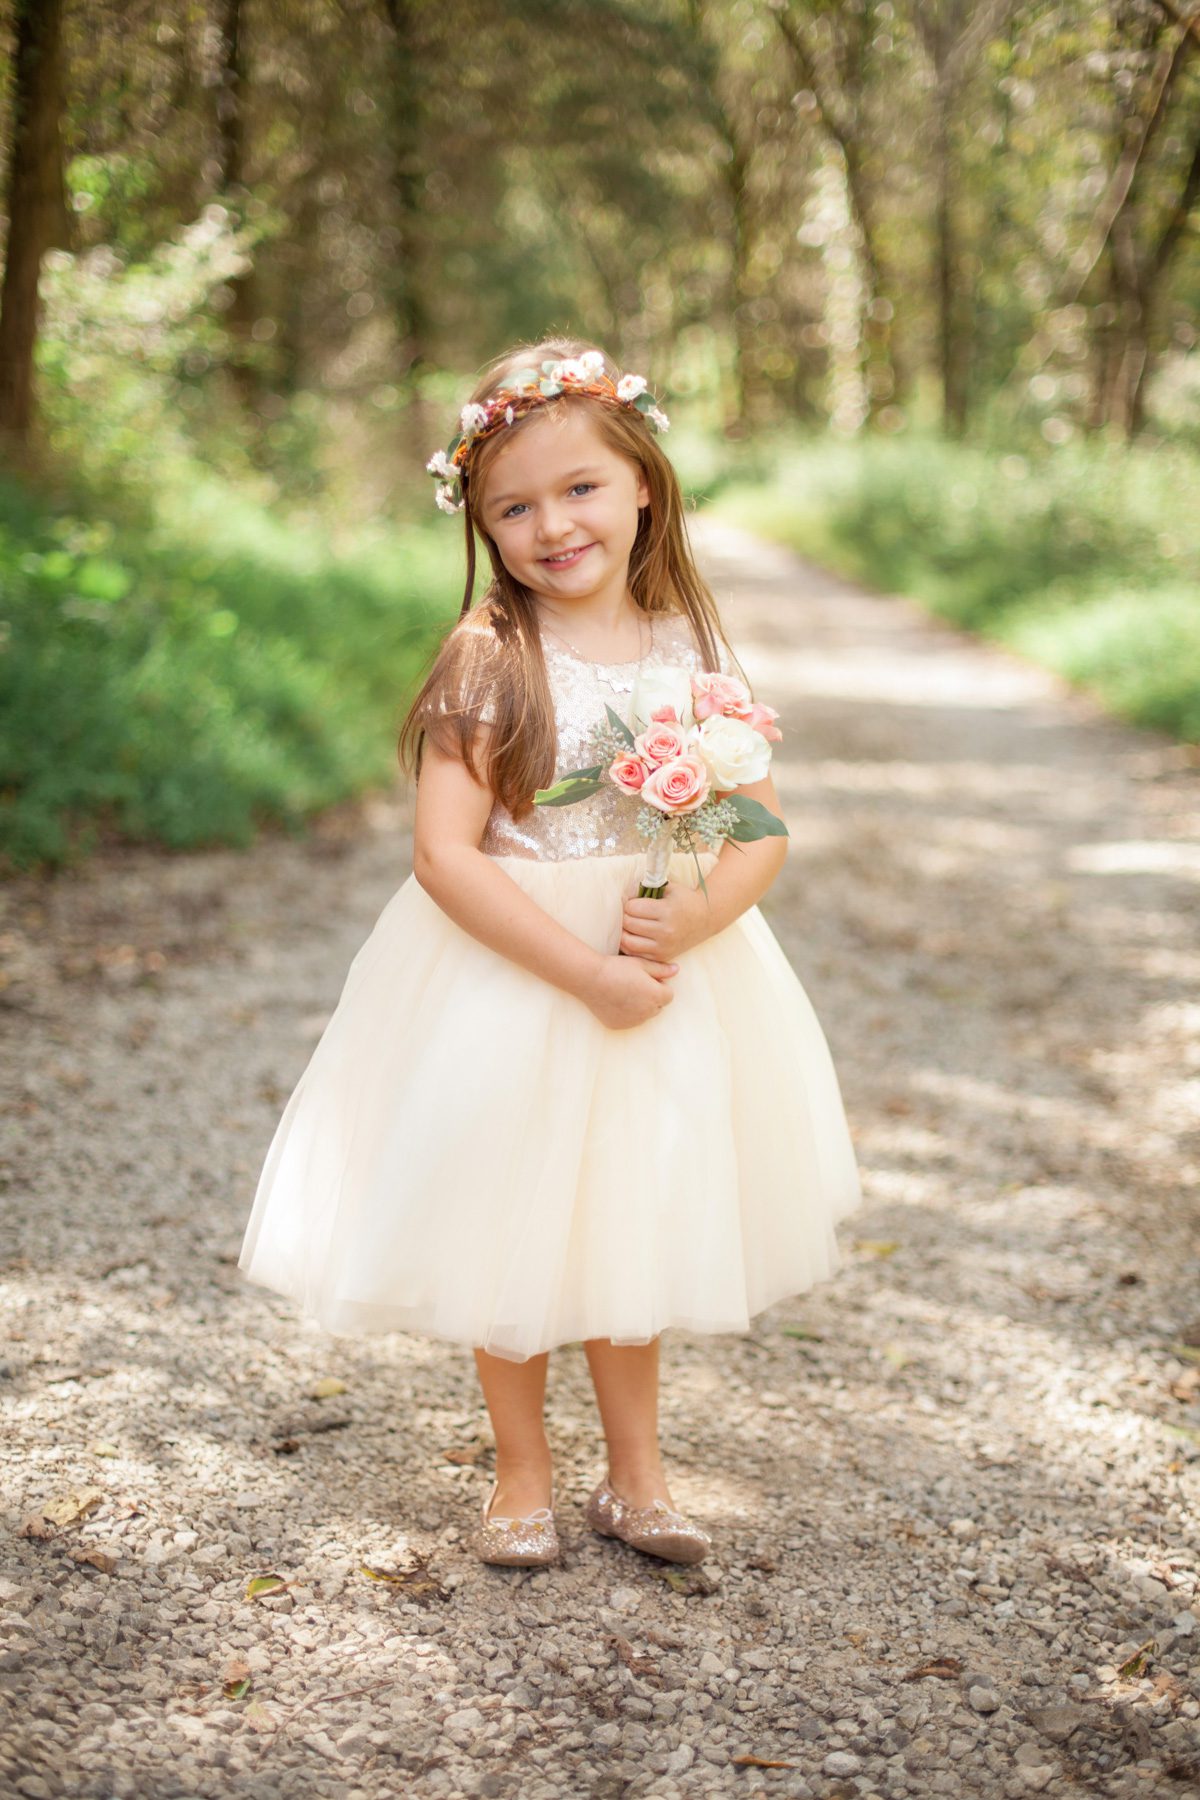 Flower girl on wedding day at Butterfly Hollow wedding in Gordonsville, TN / Photography by Krista Lee